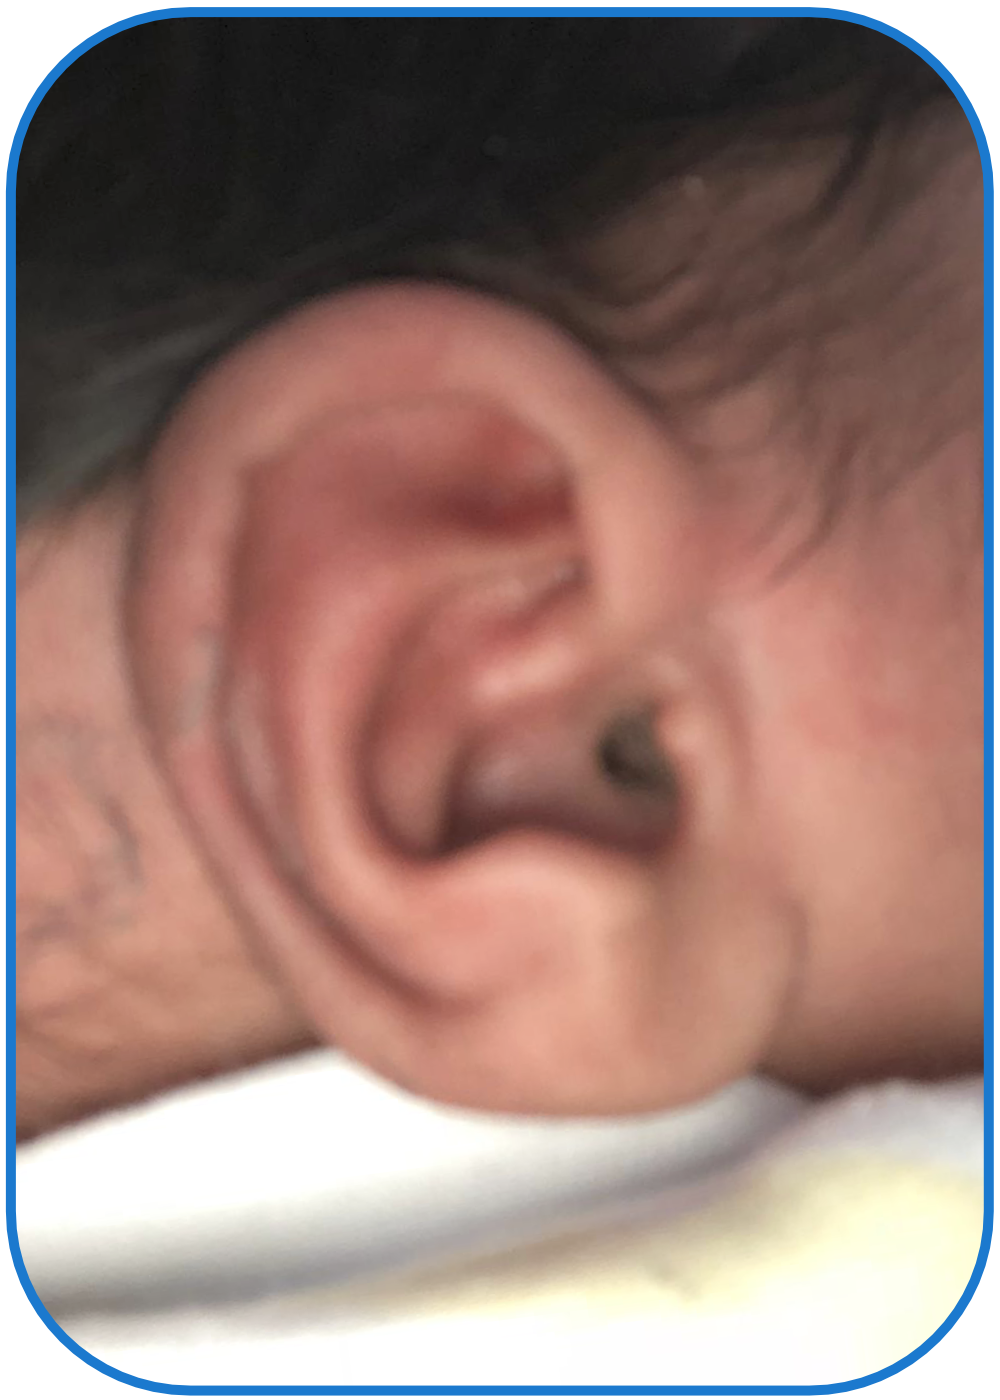 Folded Over Ear Fixed without Surgery